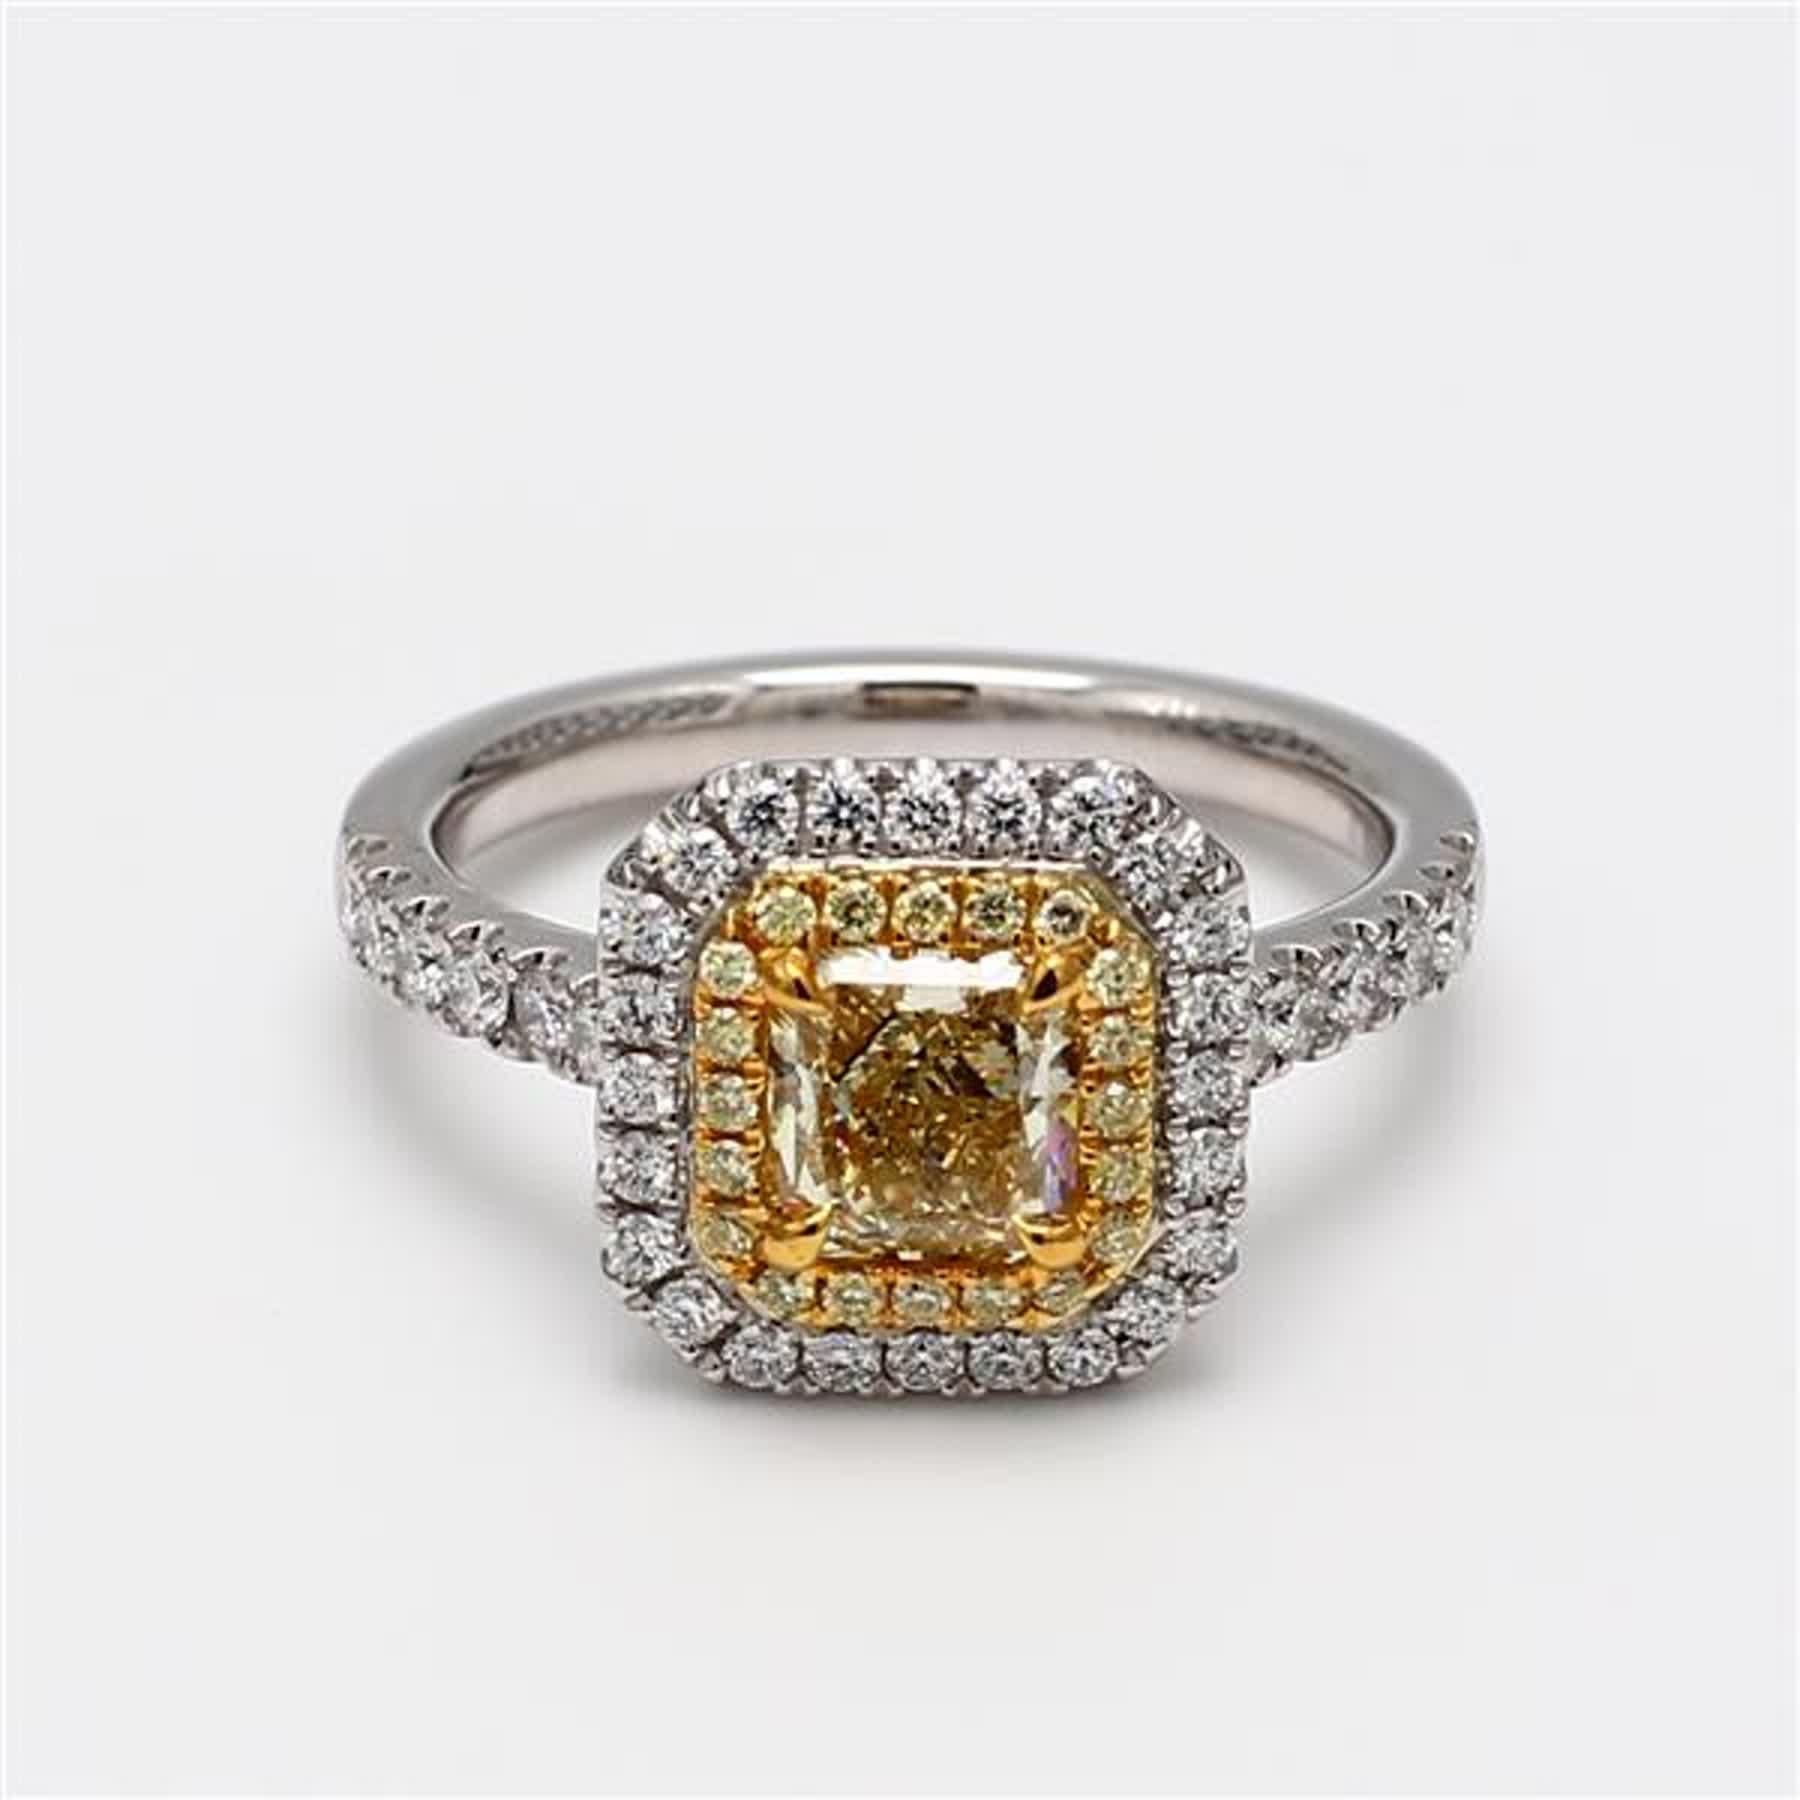 RareGemWorld's classic GIA certified diamond ring. Mounted in a beautiful 18K Yellow and White Gold and Platinum setting with a natural radiant cut yellow diamond. The yellow diamond is surrounded by round natural yellow diamond melee and round